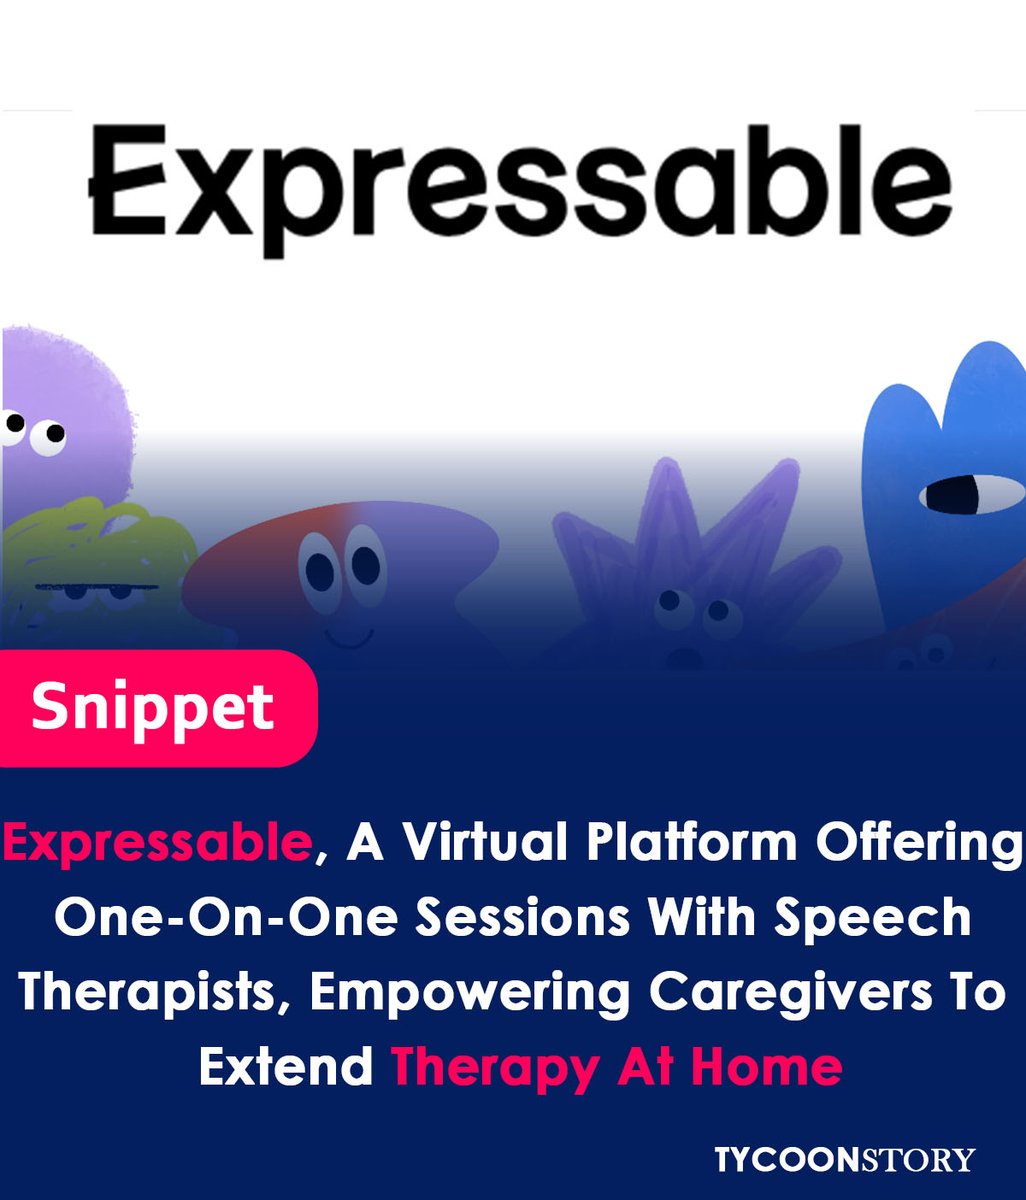 Expressable Revolutionizes Speech Therapy with Caregiver-Centered Approach
#speechtherapy #telehealth #caregiver #support #expressable #pediatrics #therapy #SLP #virtualtherapy #accessibility #speechlanguagepathology #languagedevelopment @ExpressableHQ 
tycoonstory.com